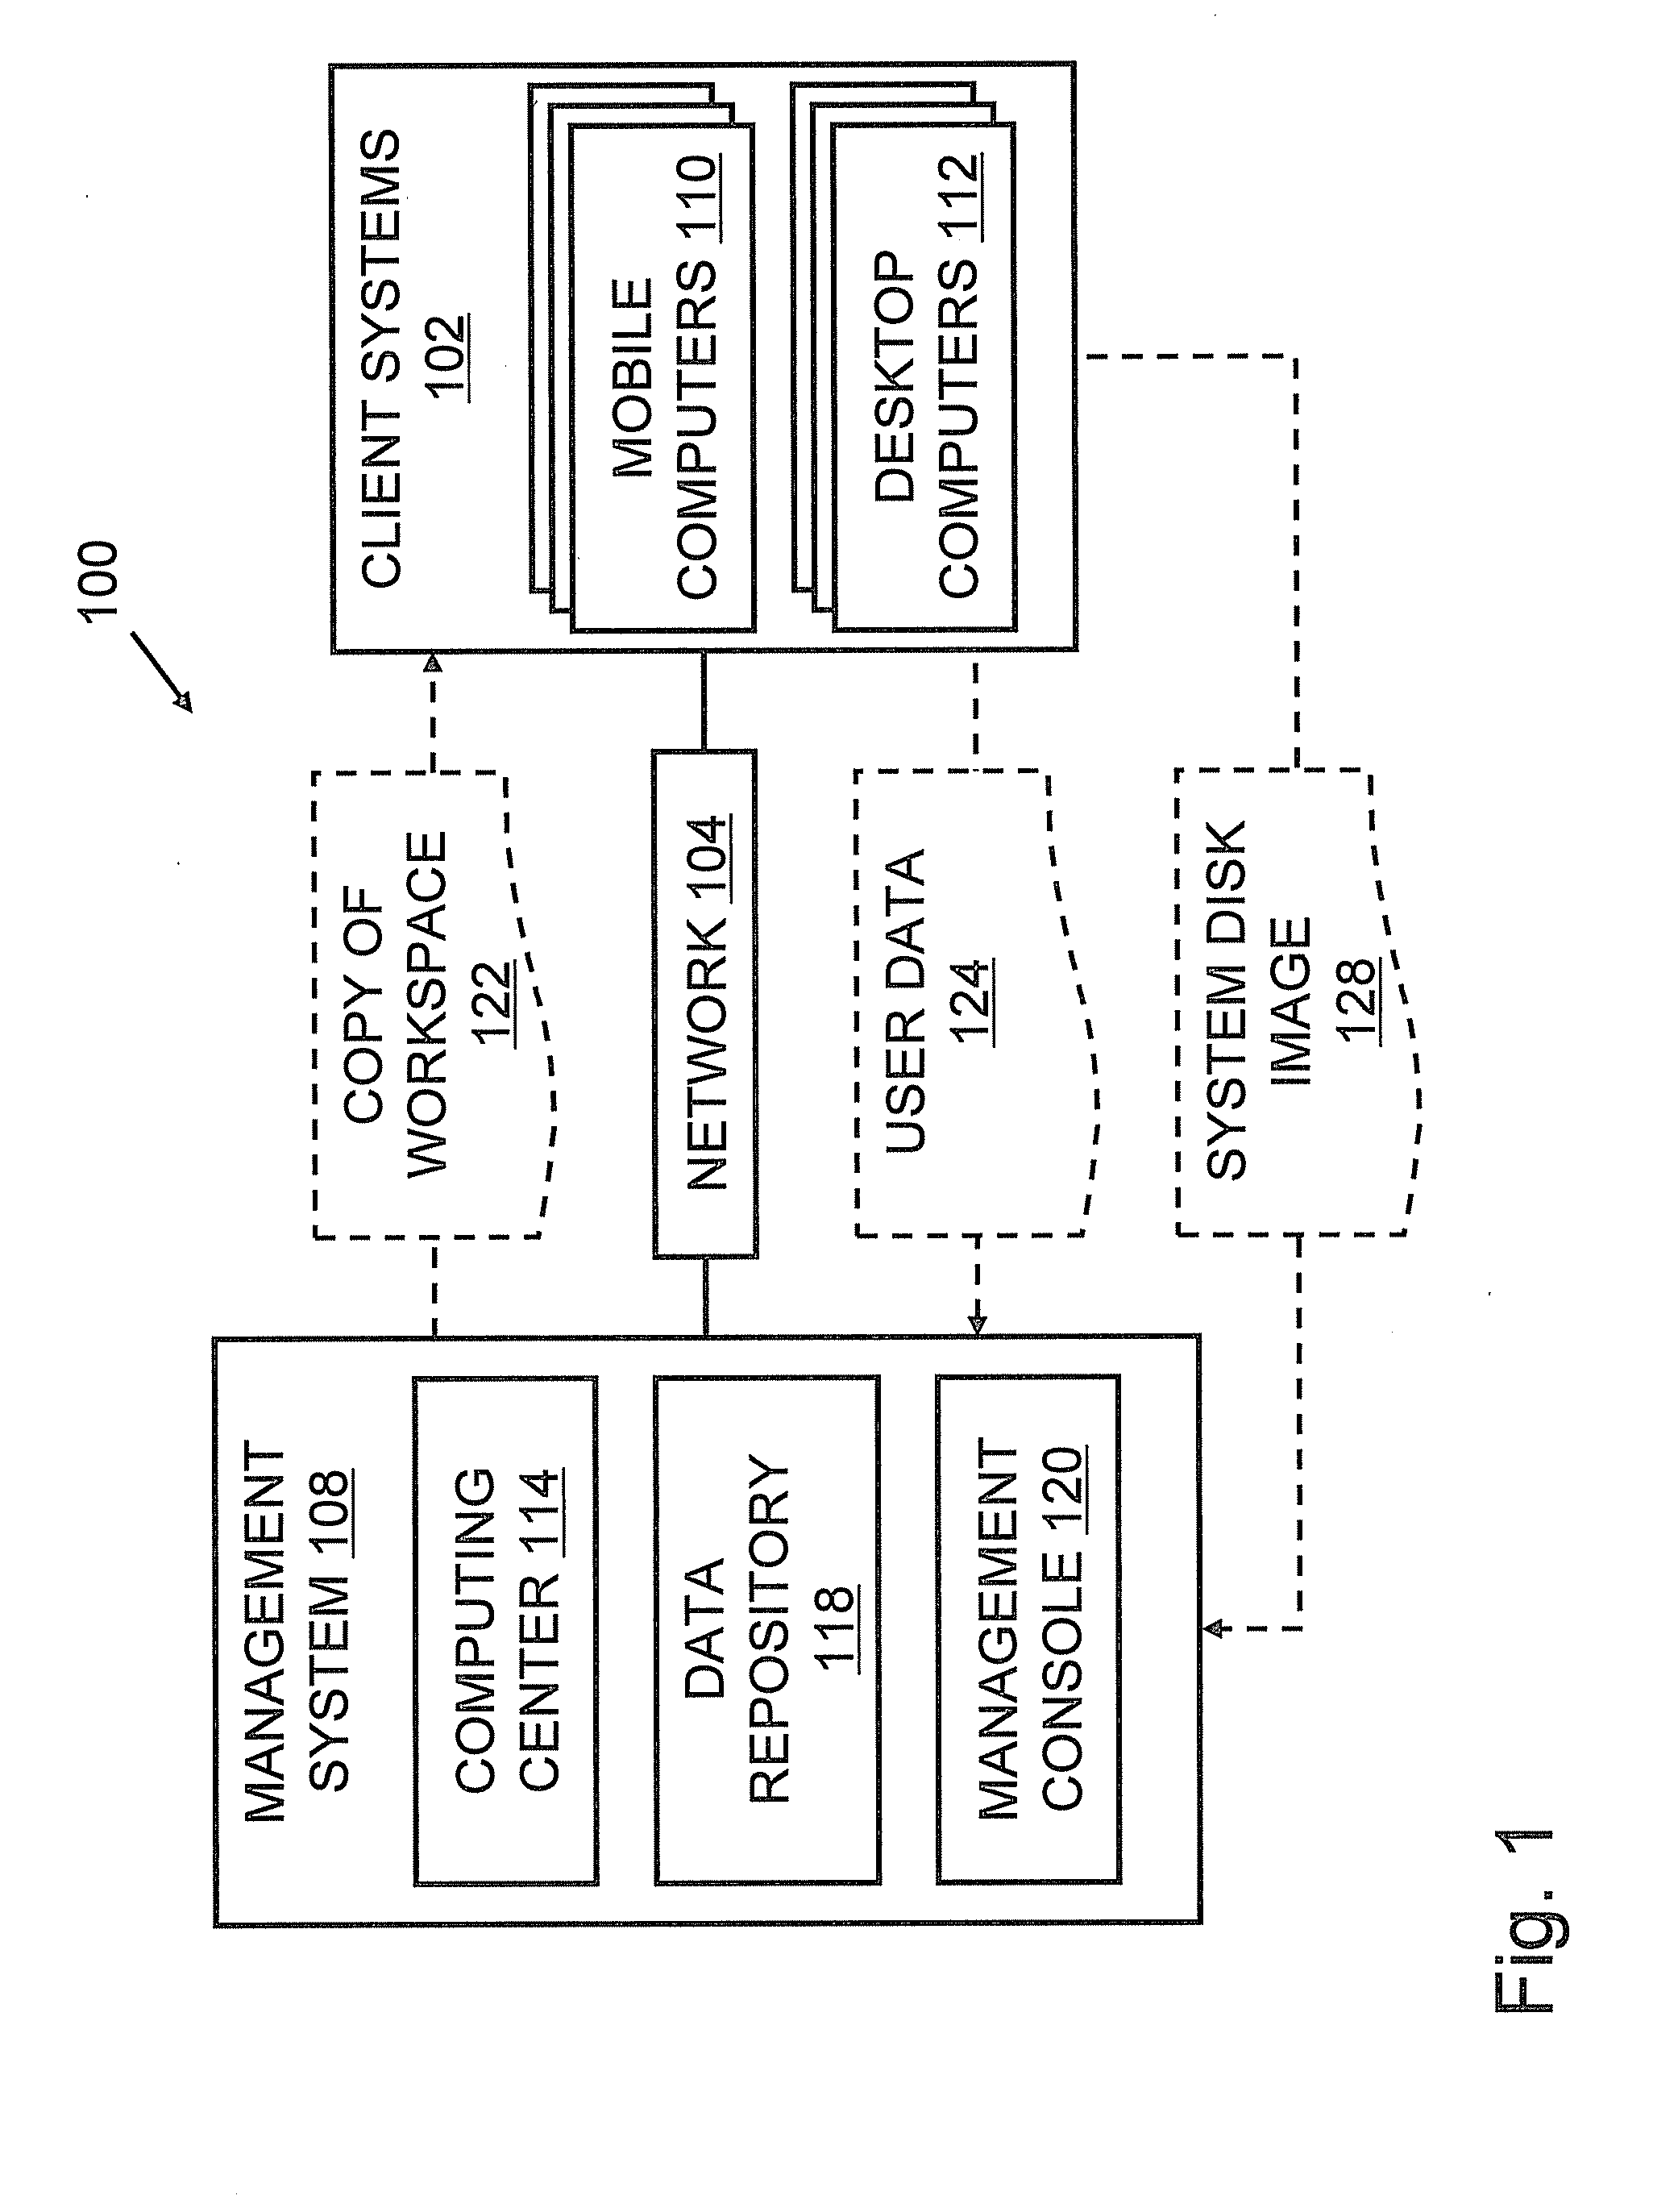 Virtual computing management systems and methods